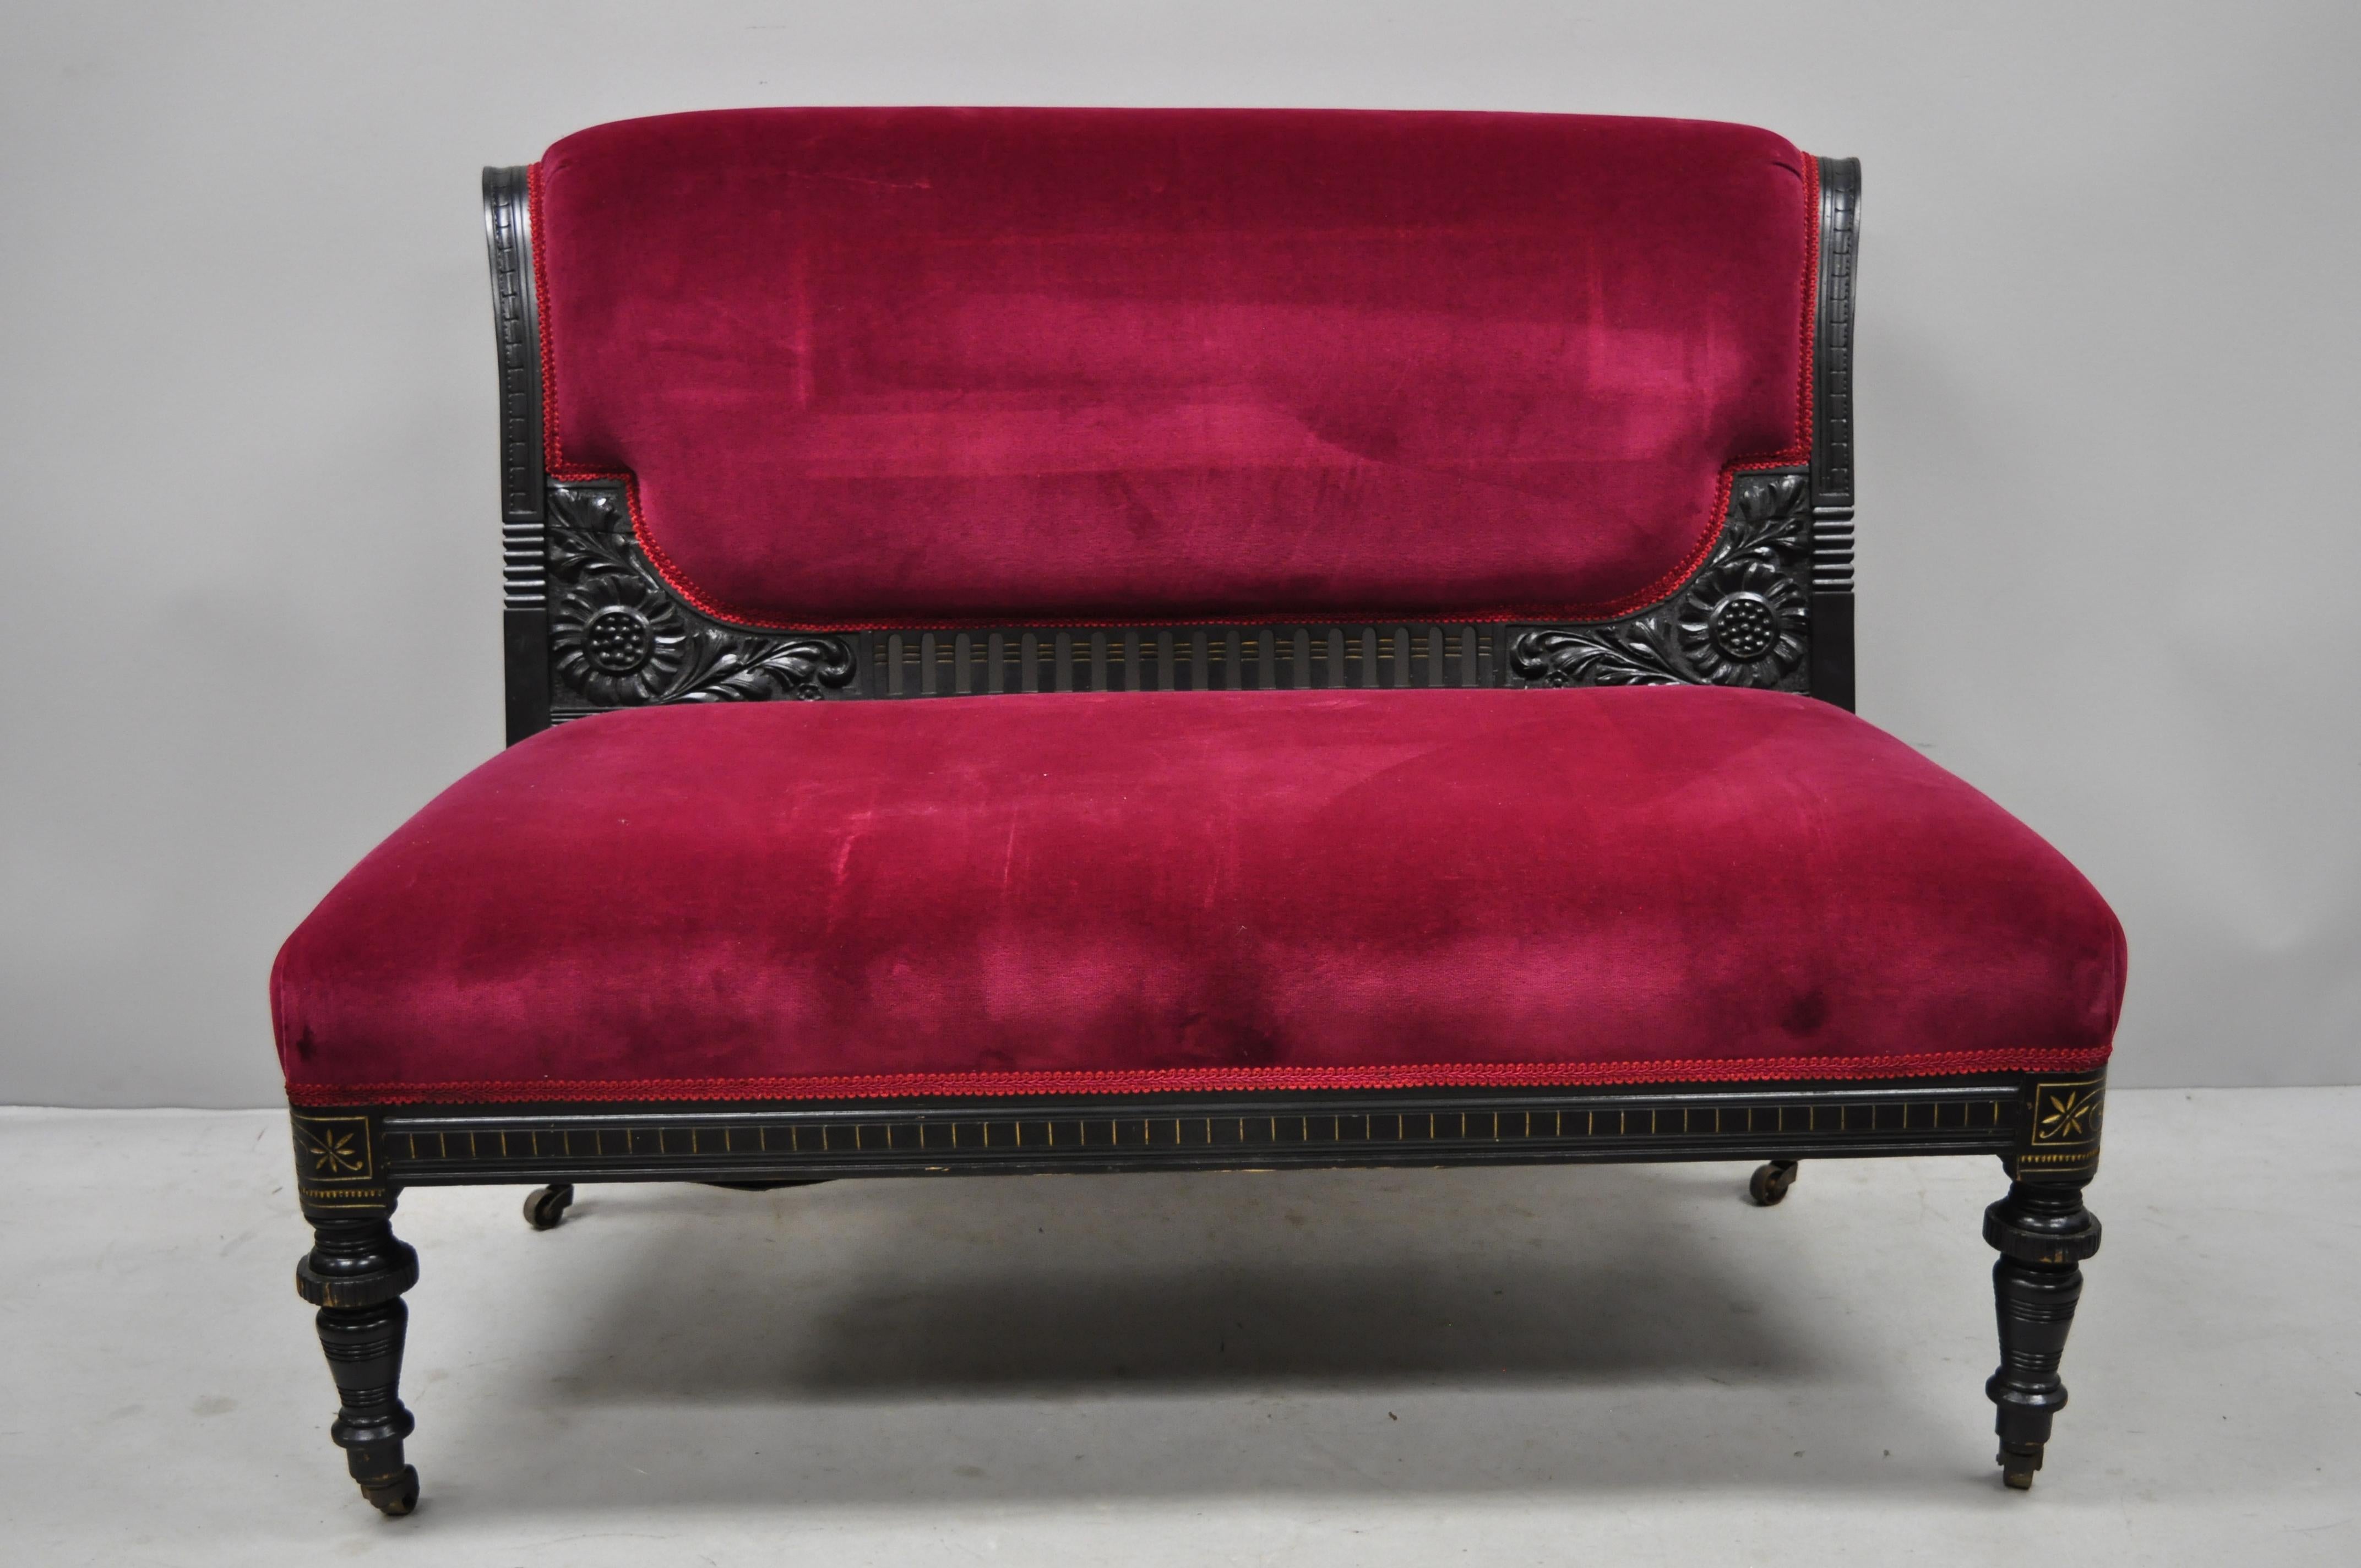 3-piece Eastlake Victorian aesthetic movement ebonized parlor set sofa loveseat chair. Listing features sofa, armless loveseat, side chair, ebonized frames, finely carved details, rolling casters, red velvet upholstery, very nice antique item, circa